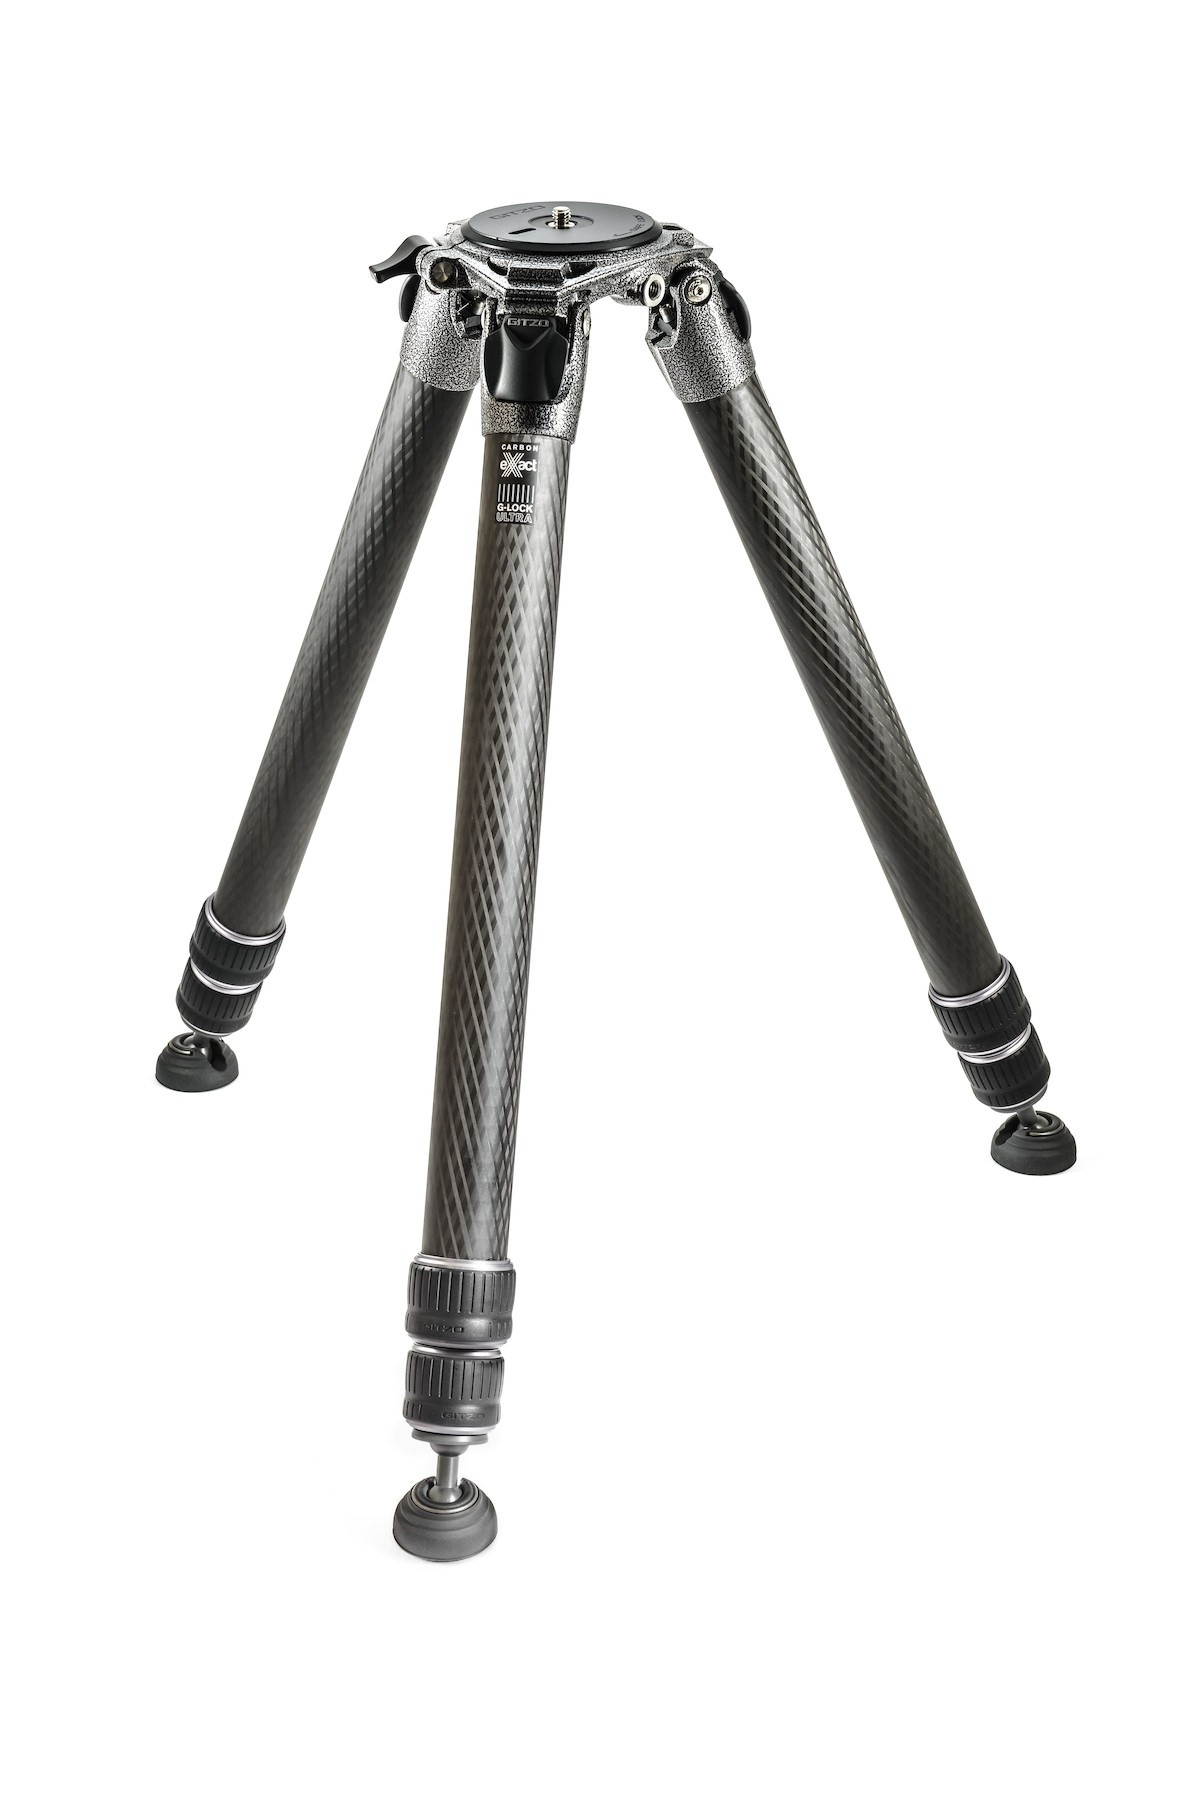 Gitzo tripod Systematic, series 5, 3 sections